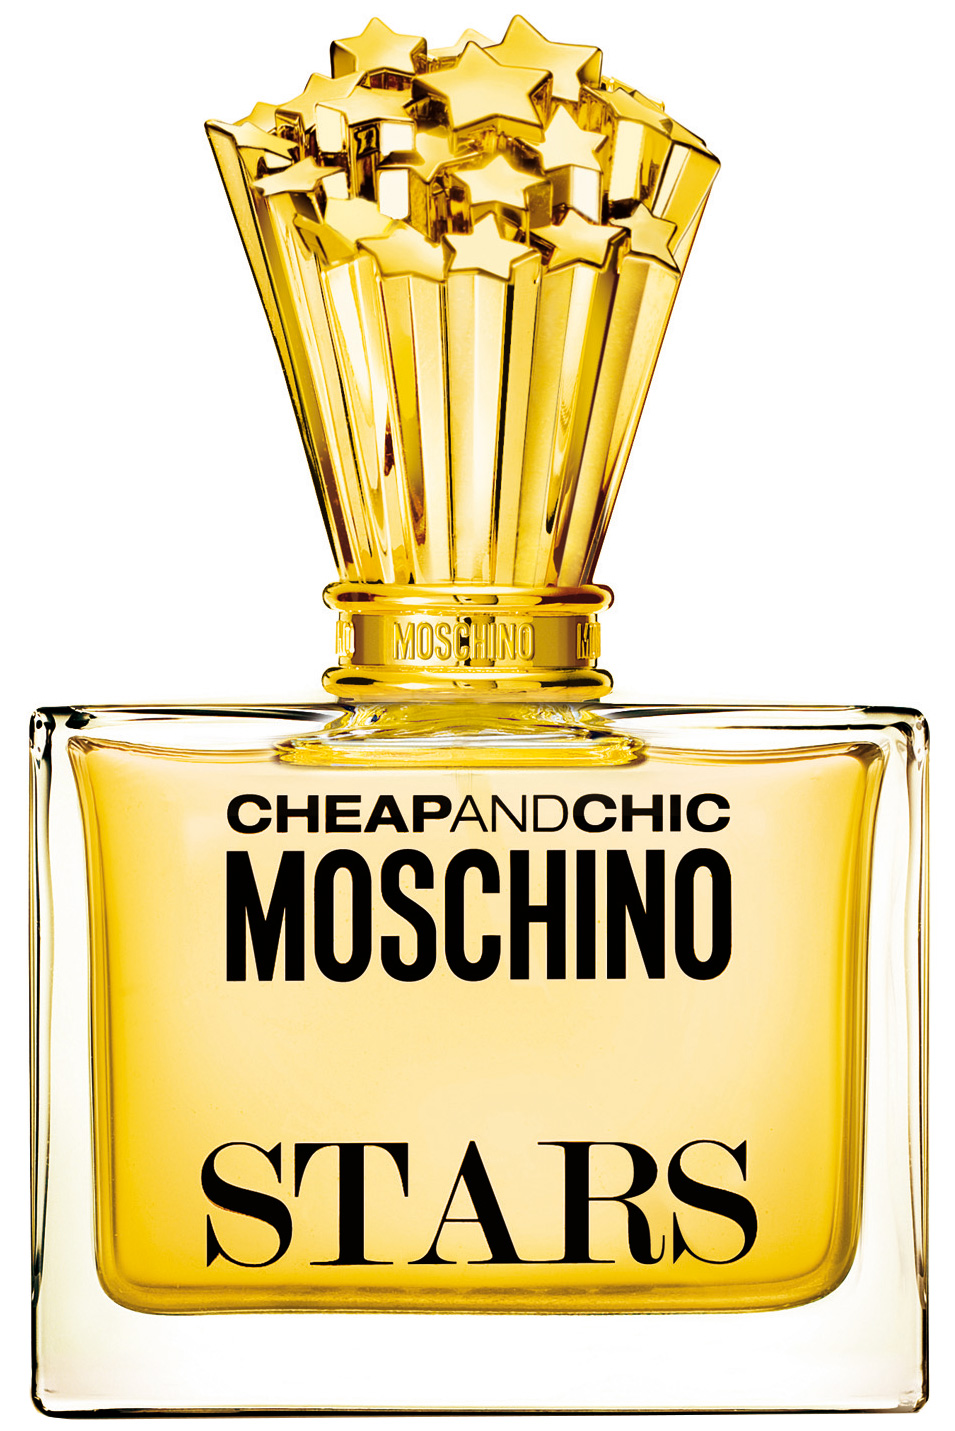 Stars Moschino perfume - a new fragrance for women 2014